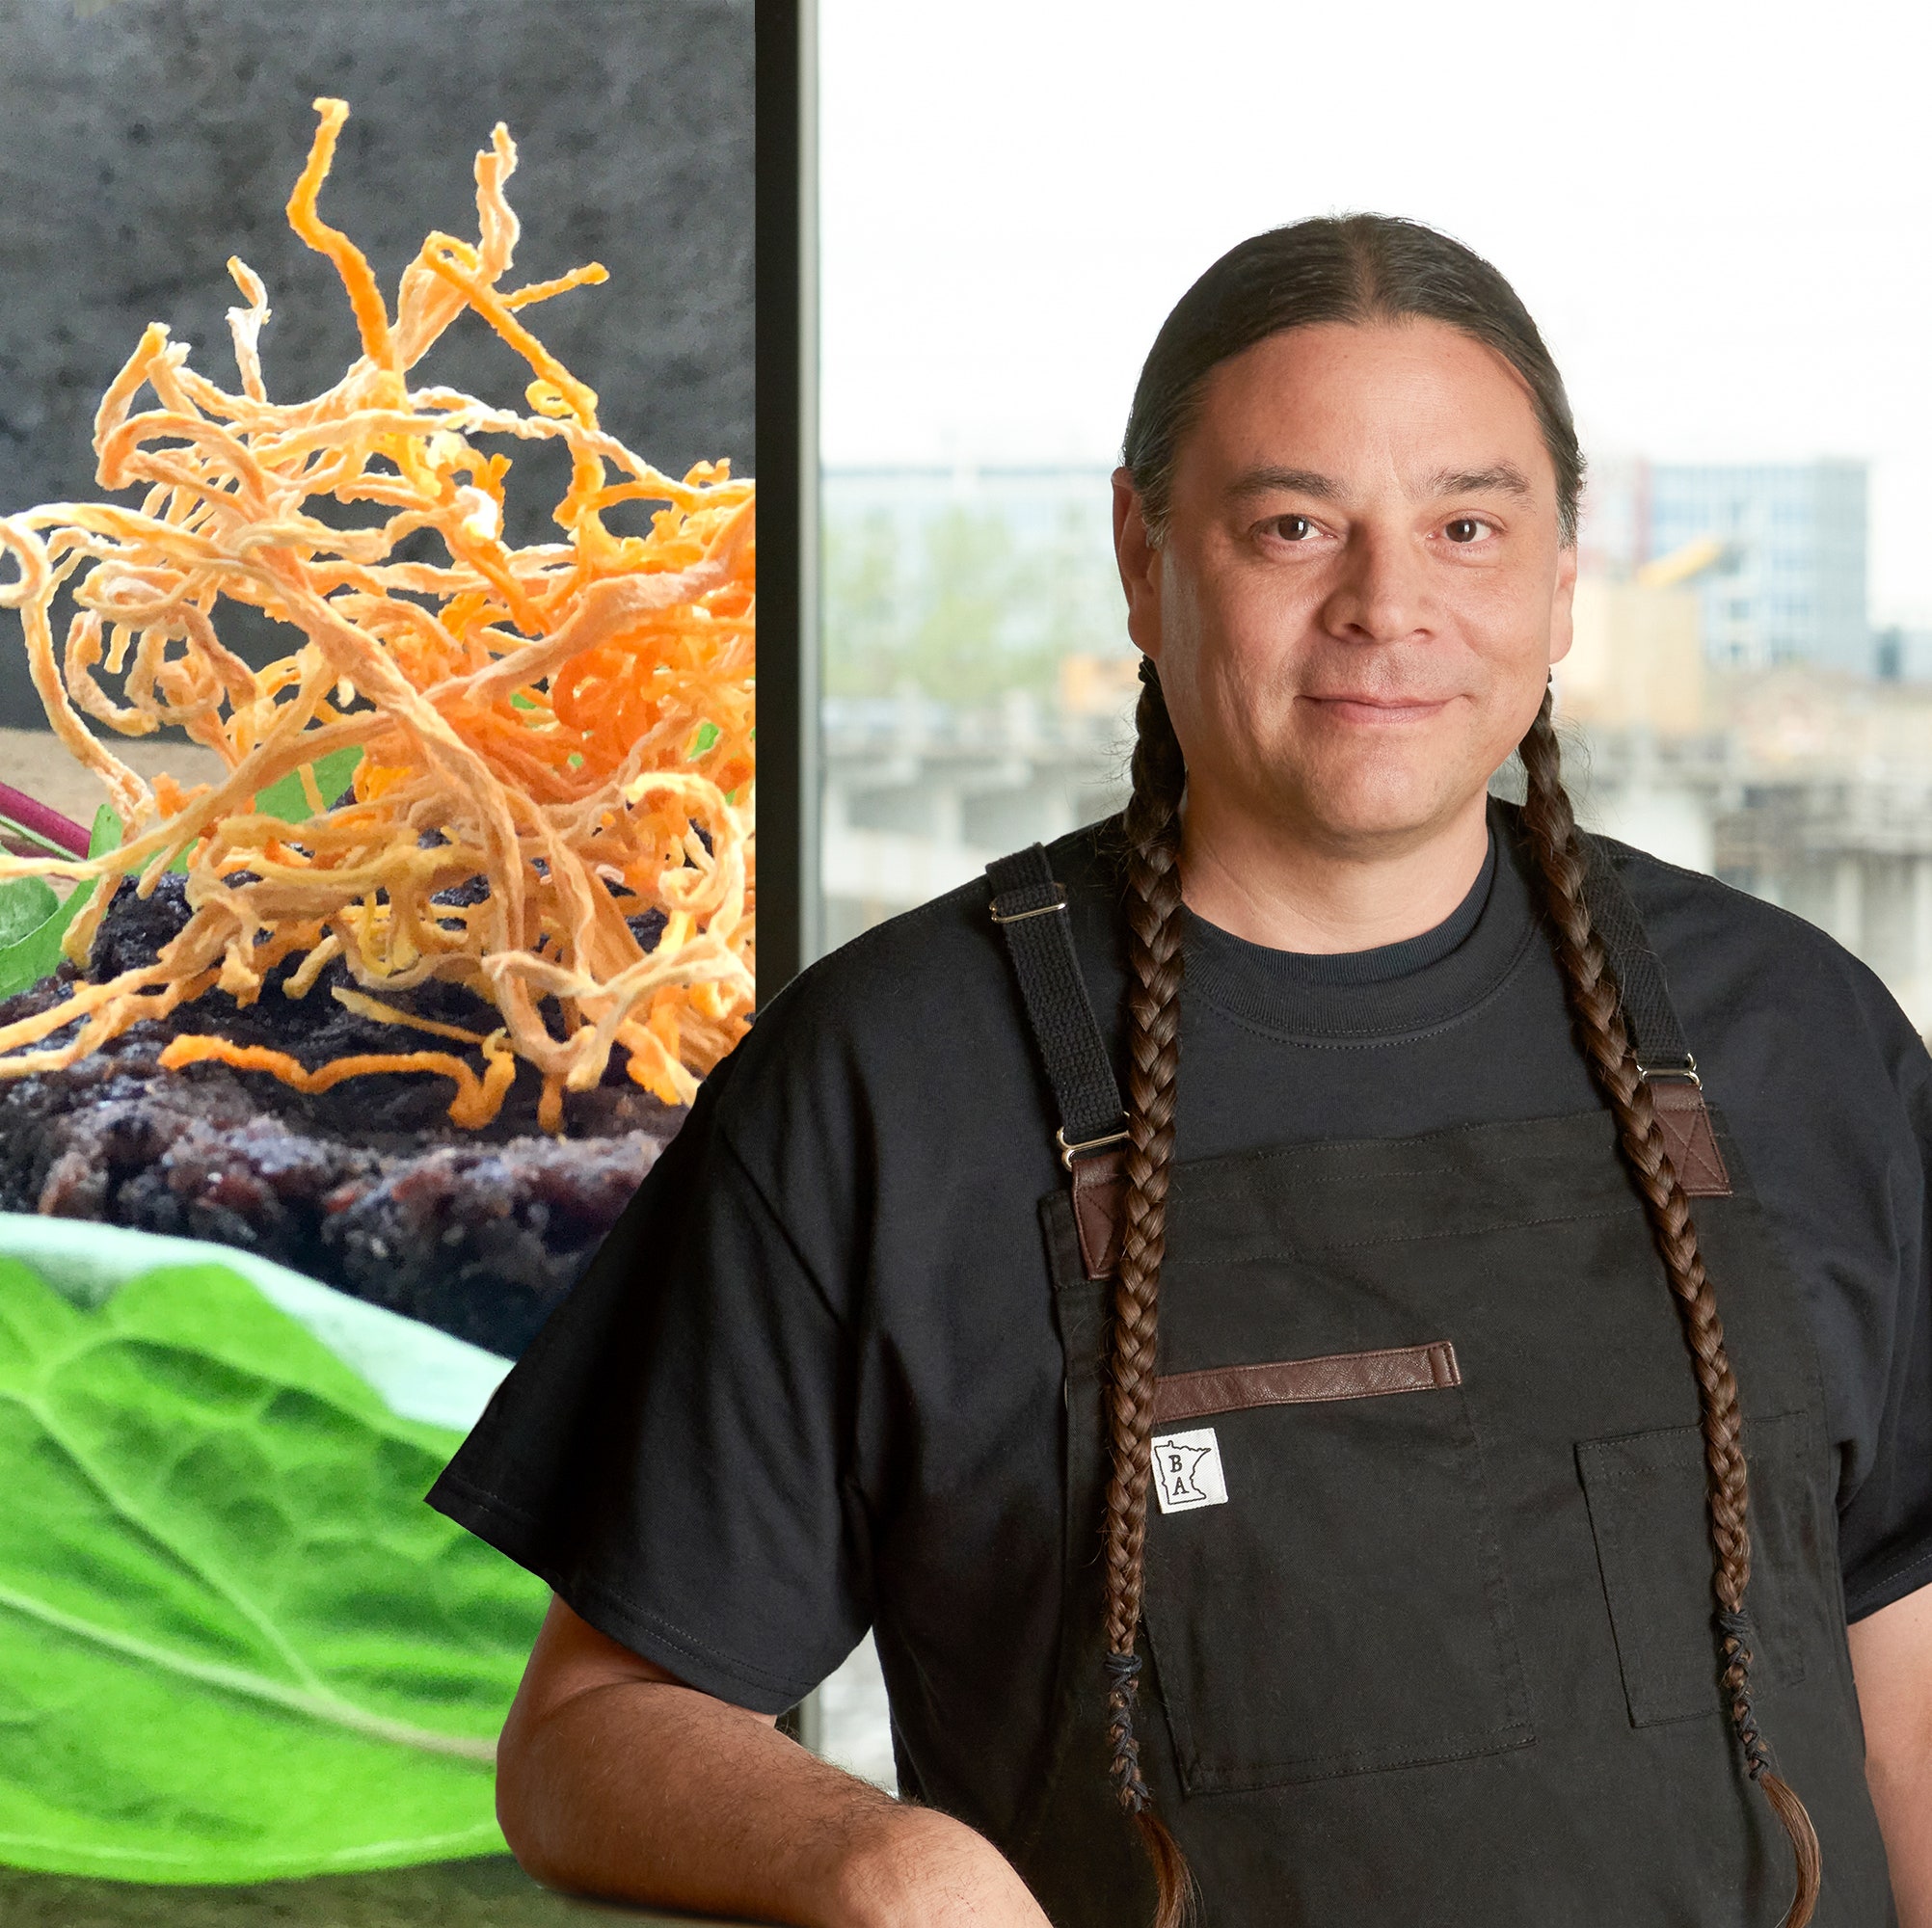 The Man Who Sees a Future Where Indigenous Foods Are as Ubiquitous as Burgers